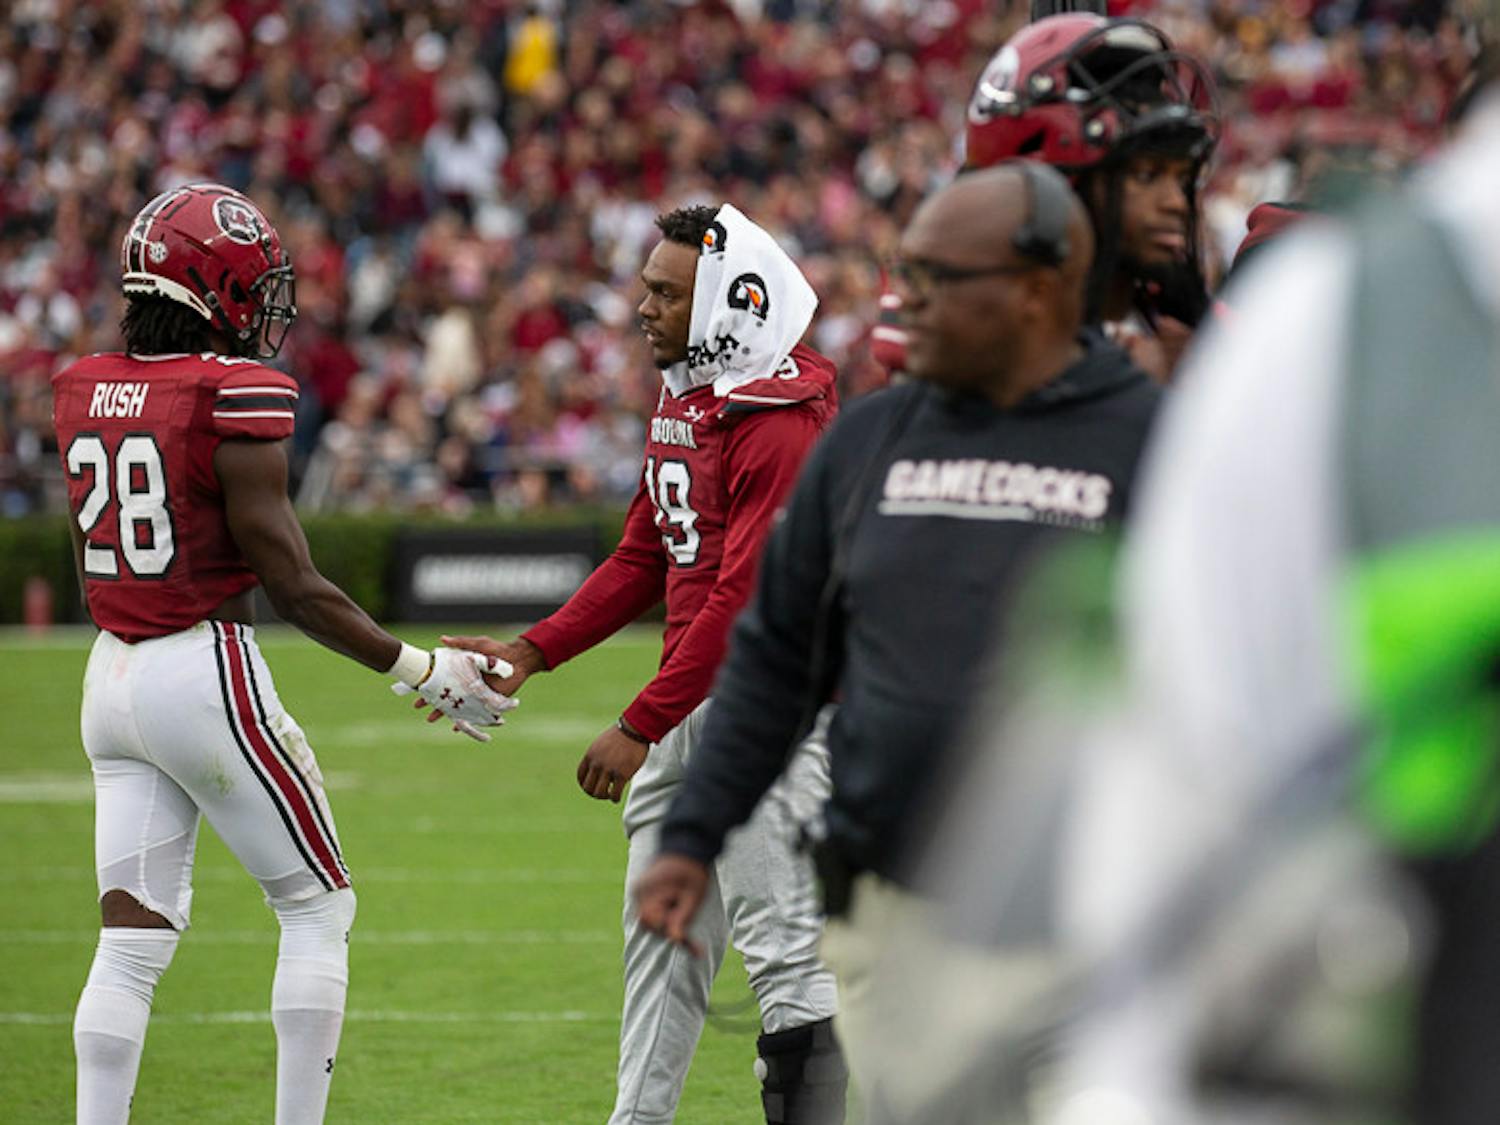 Sixth-year linebacker Brad Johnson (on right) greets redshirt senior defensive back Darius Rush after the team takes a timeout. South Carolina lost to Missouri 23-10.